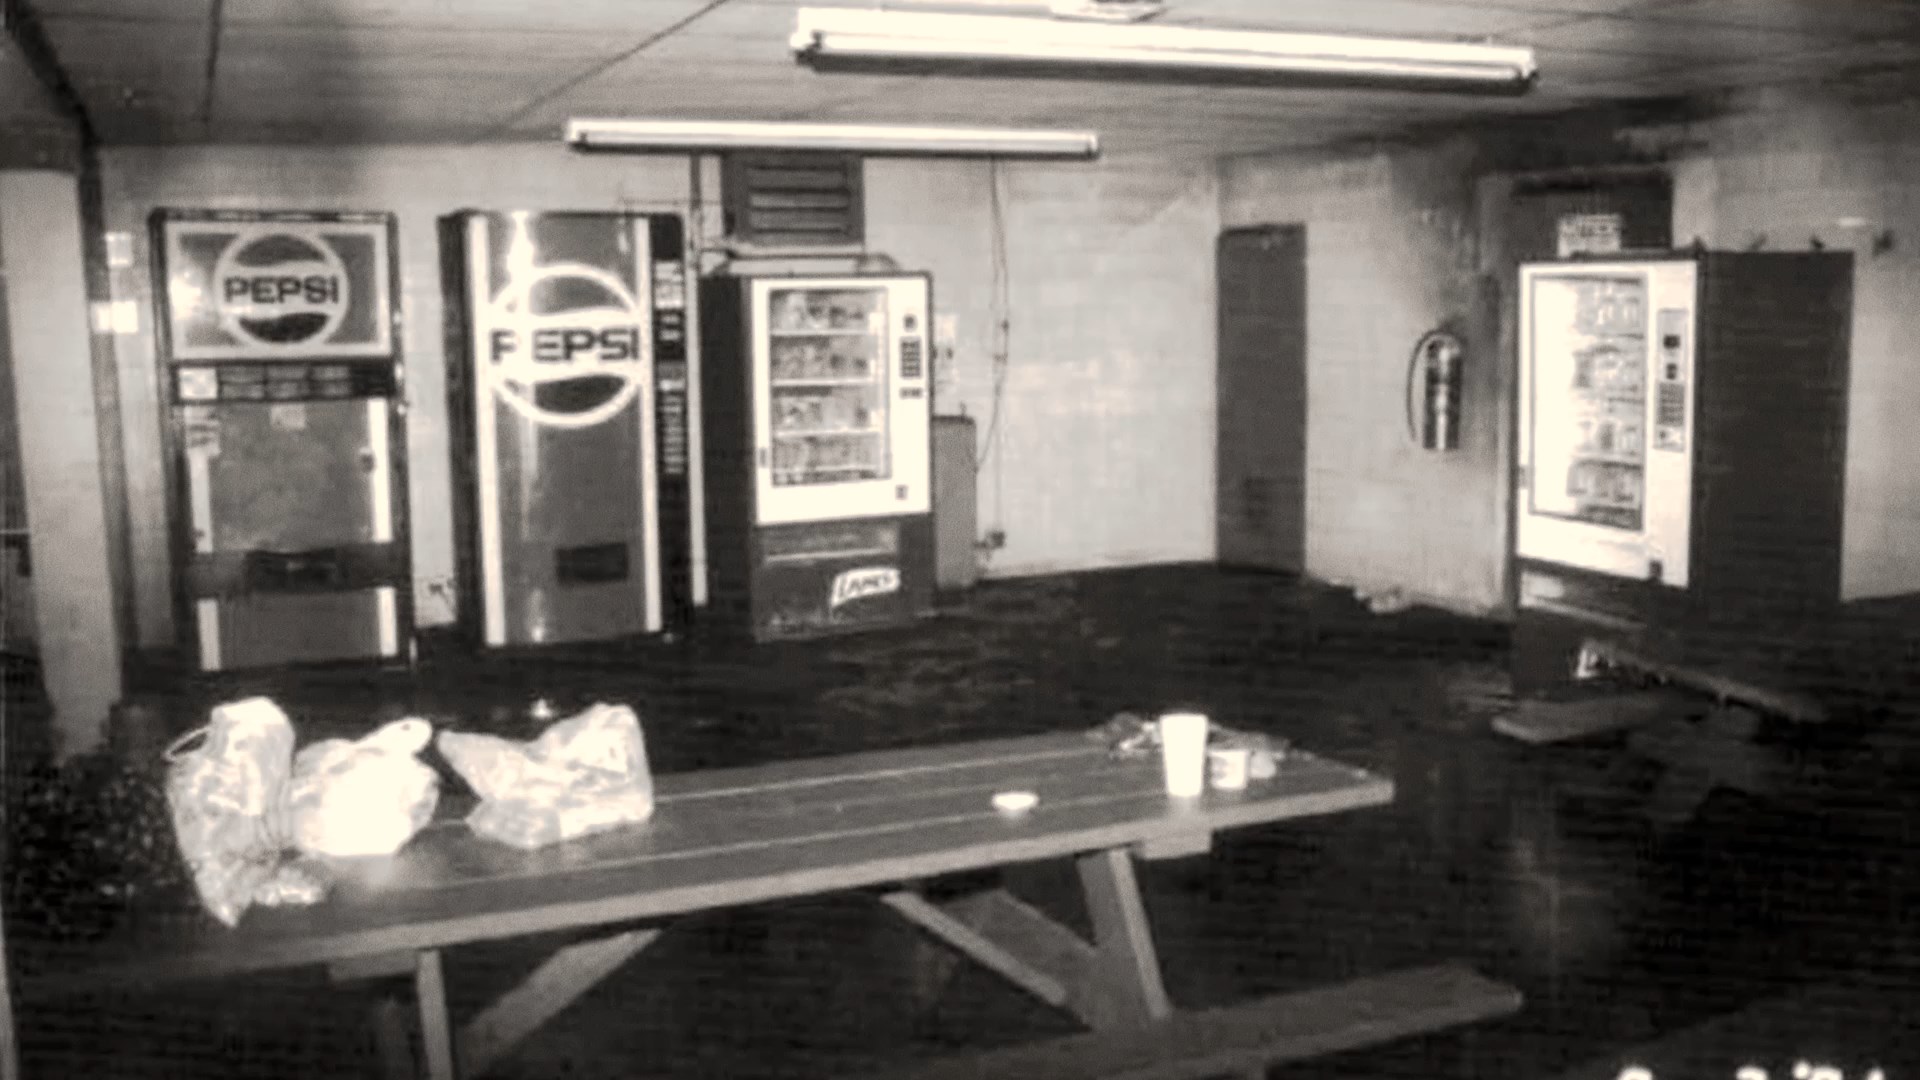 Black and white image of the Imperial Foods breakroom after the fire.